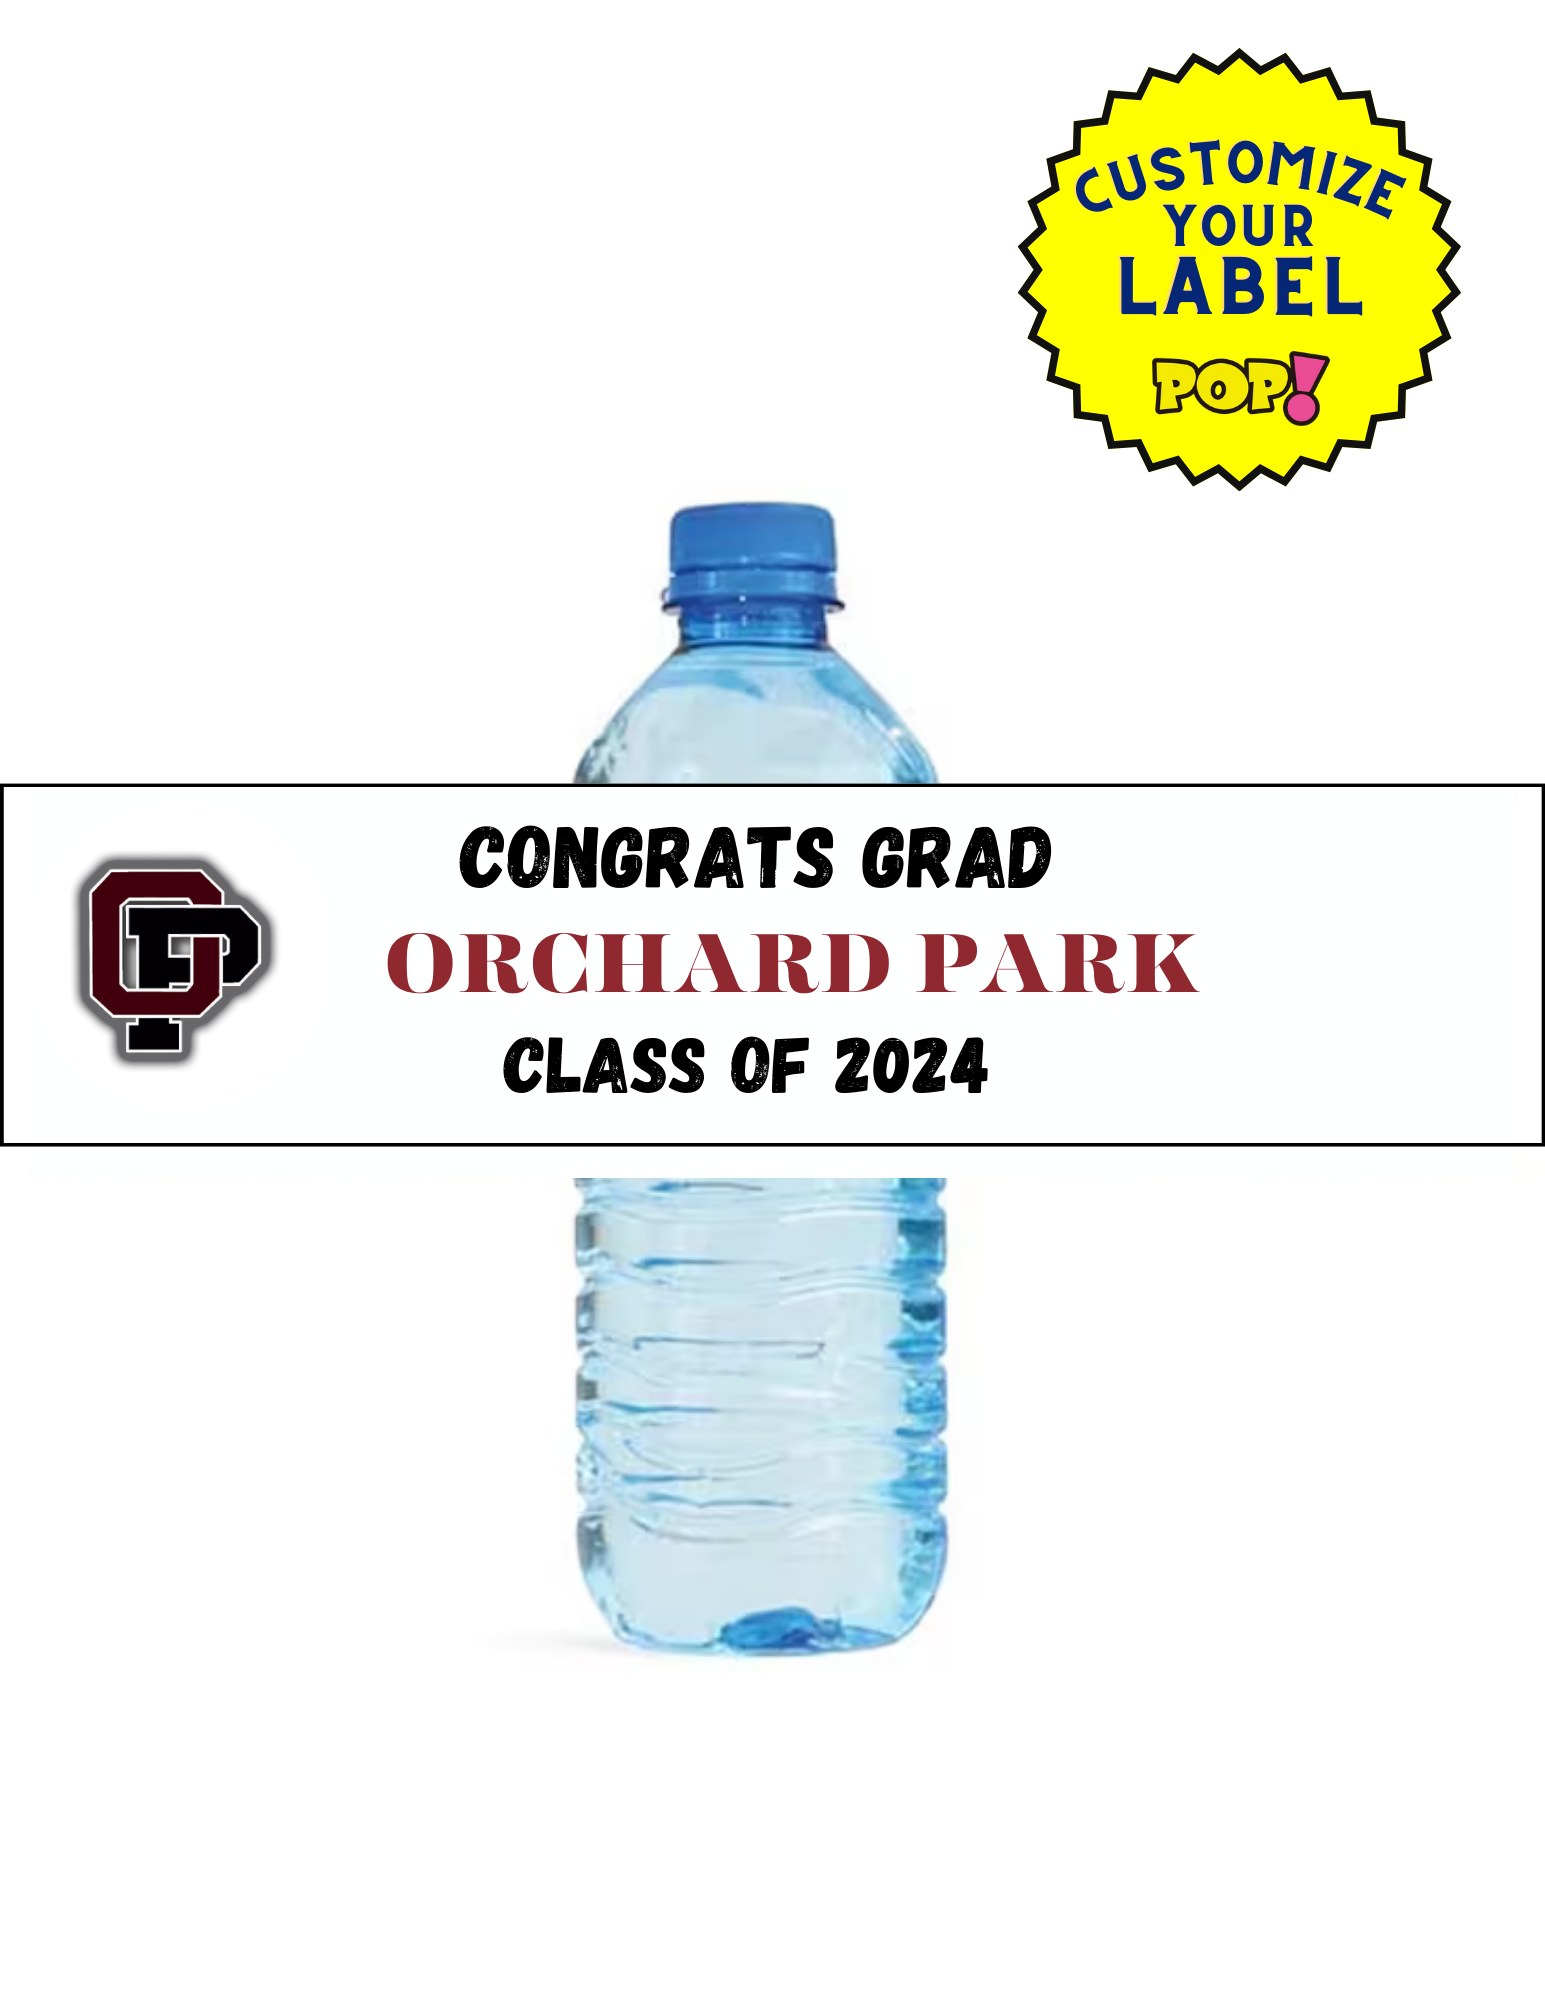 School Water Bottle Labels - Choose Your School - POPPartyballoons